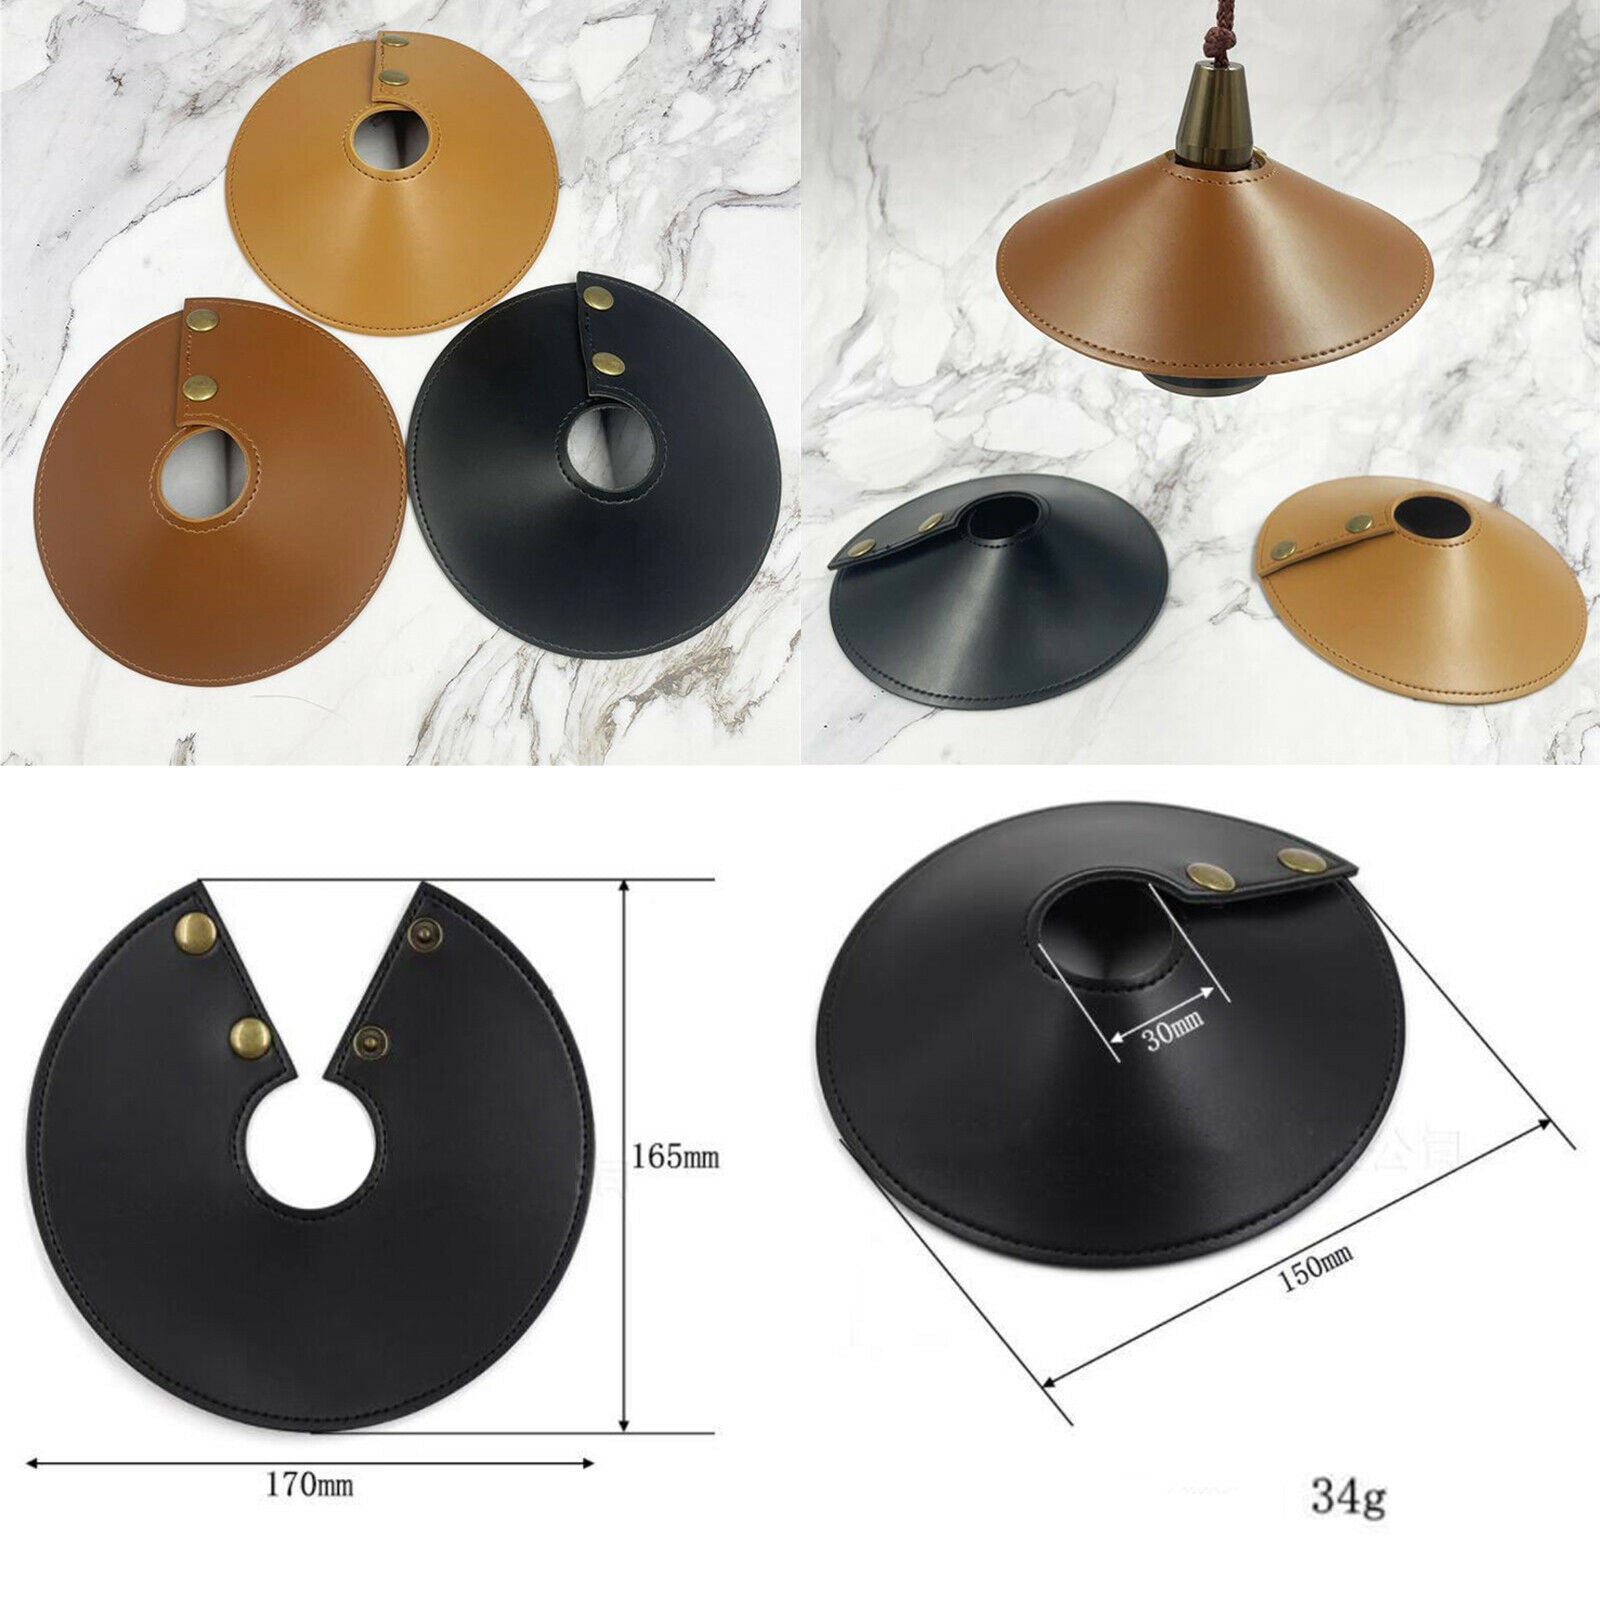 2X Outdoor PU Leather Lamp Shade Replacement Light Cover Removable Light Brown